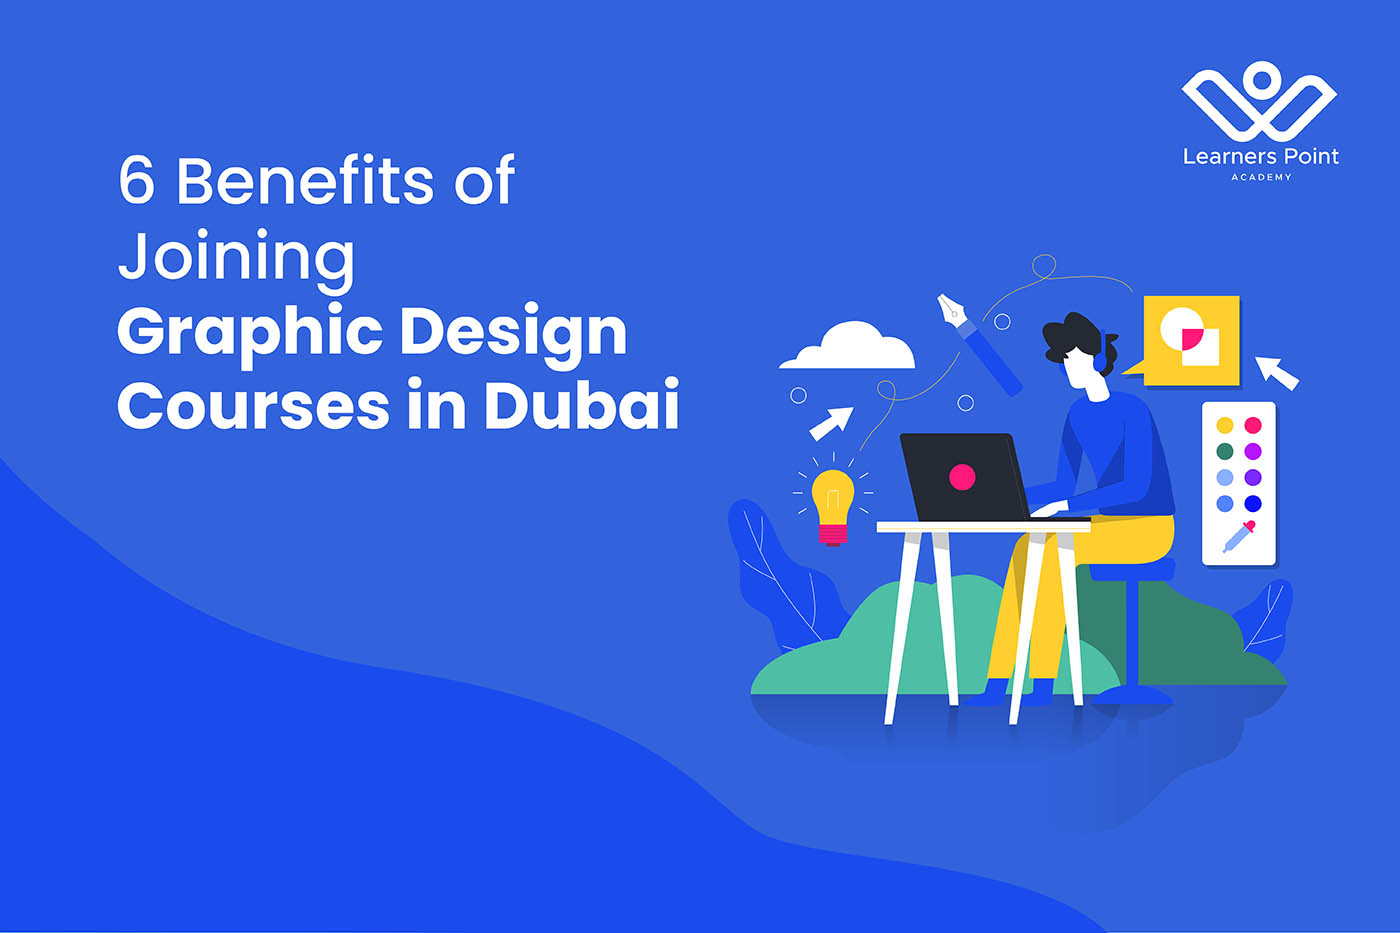 6 Benefits of Joining Graphic Design Courses in Dubai